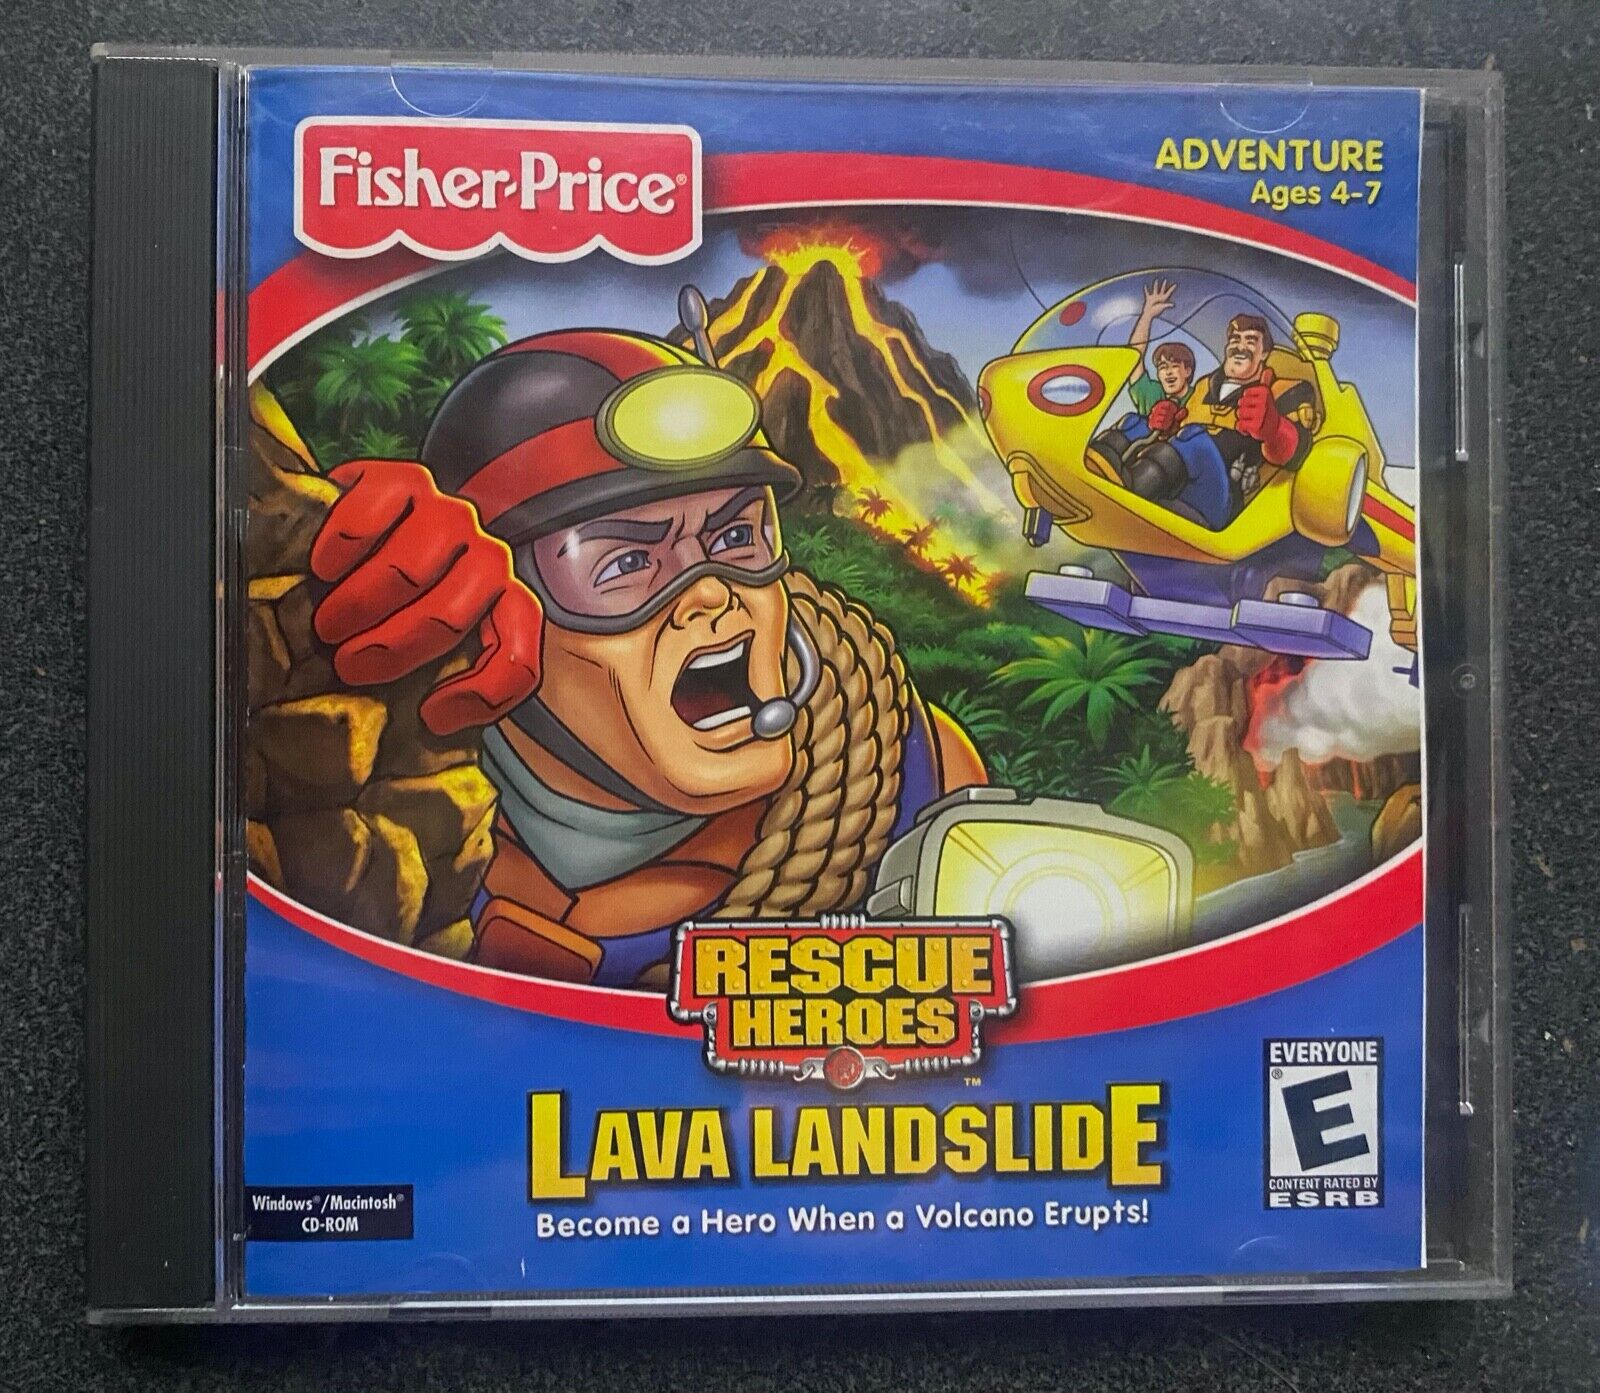 FISHER PRICE RESCUE HEROES LAVA LANDSLIDE PC CD-ROM COMPUTER GAME~AGES 4-7